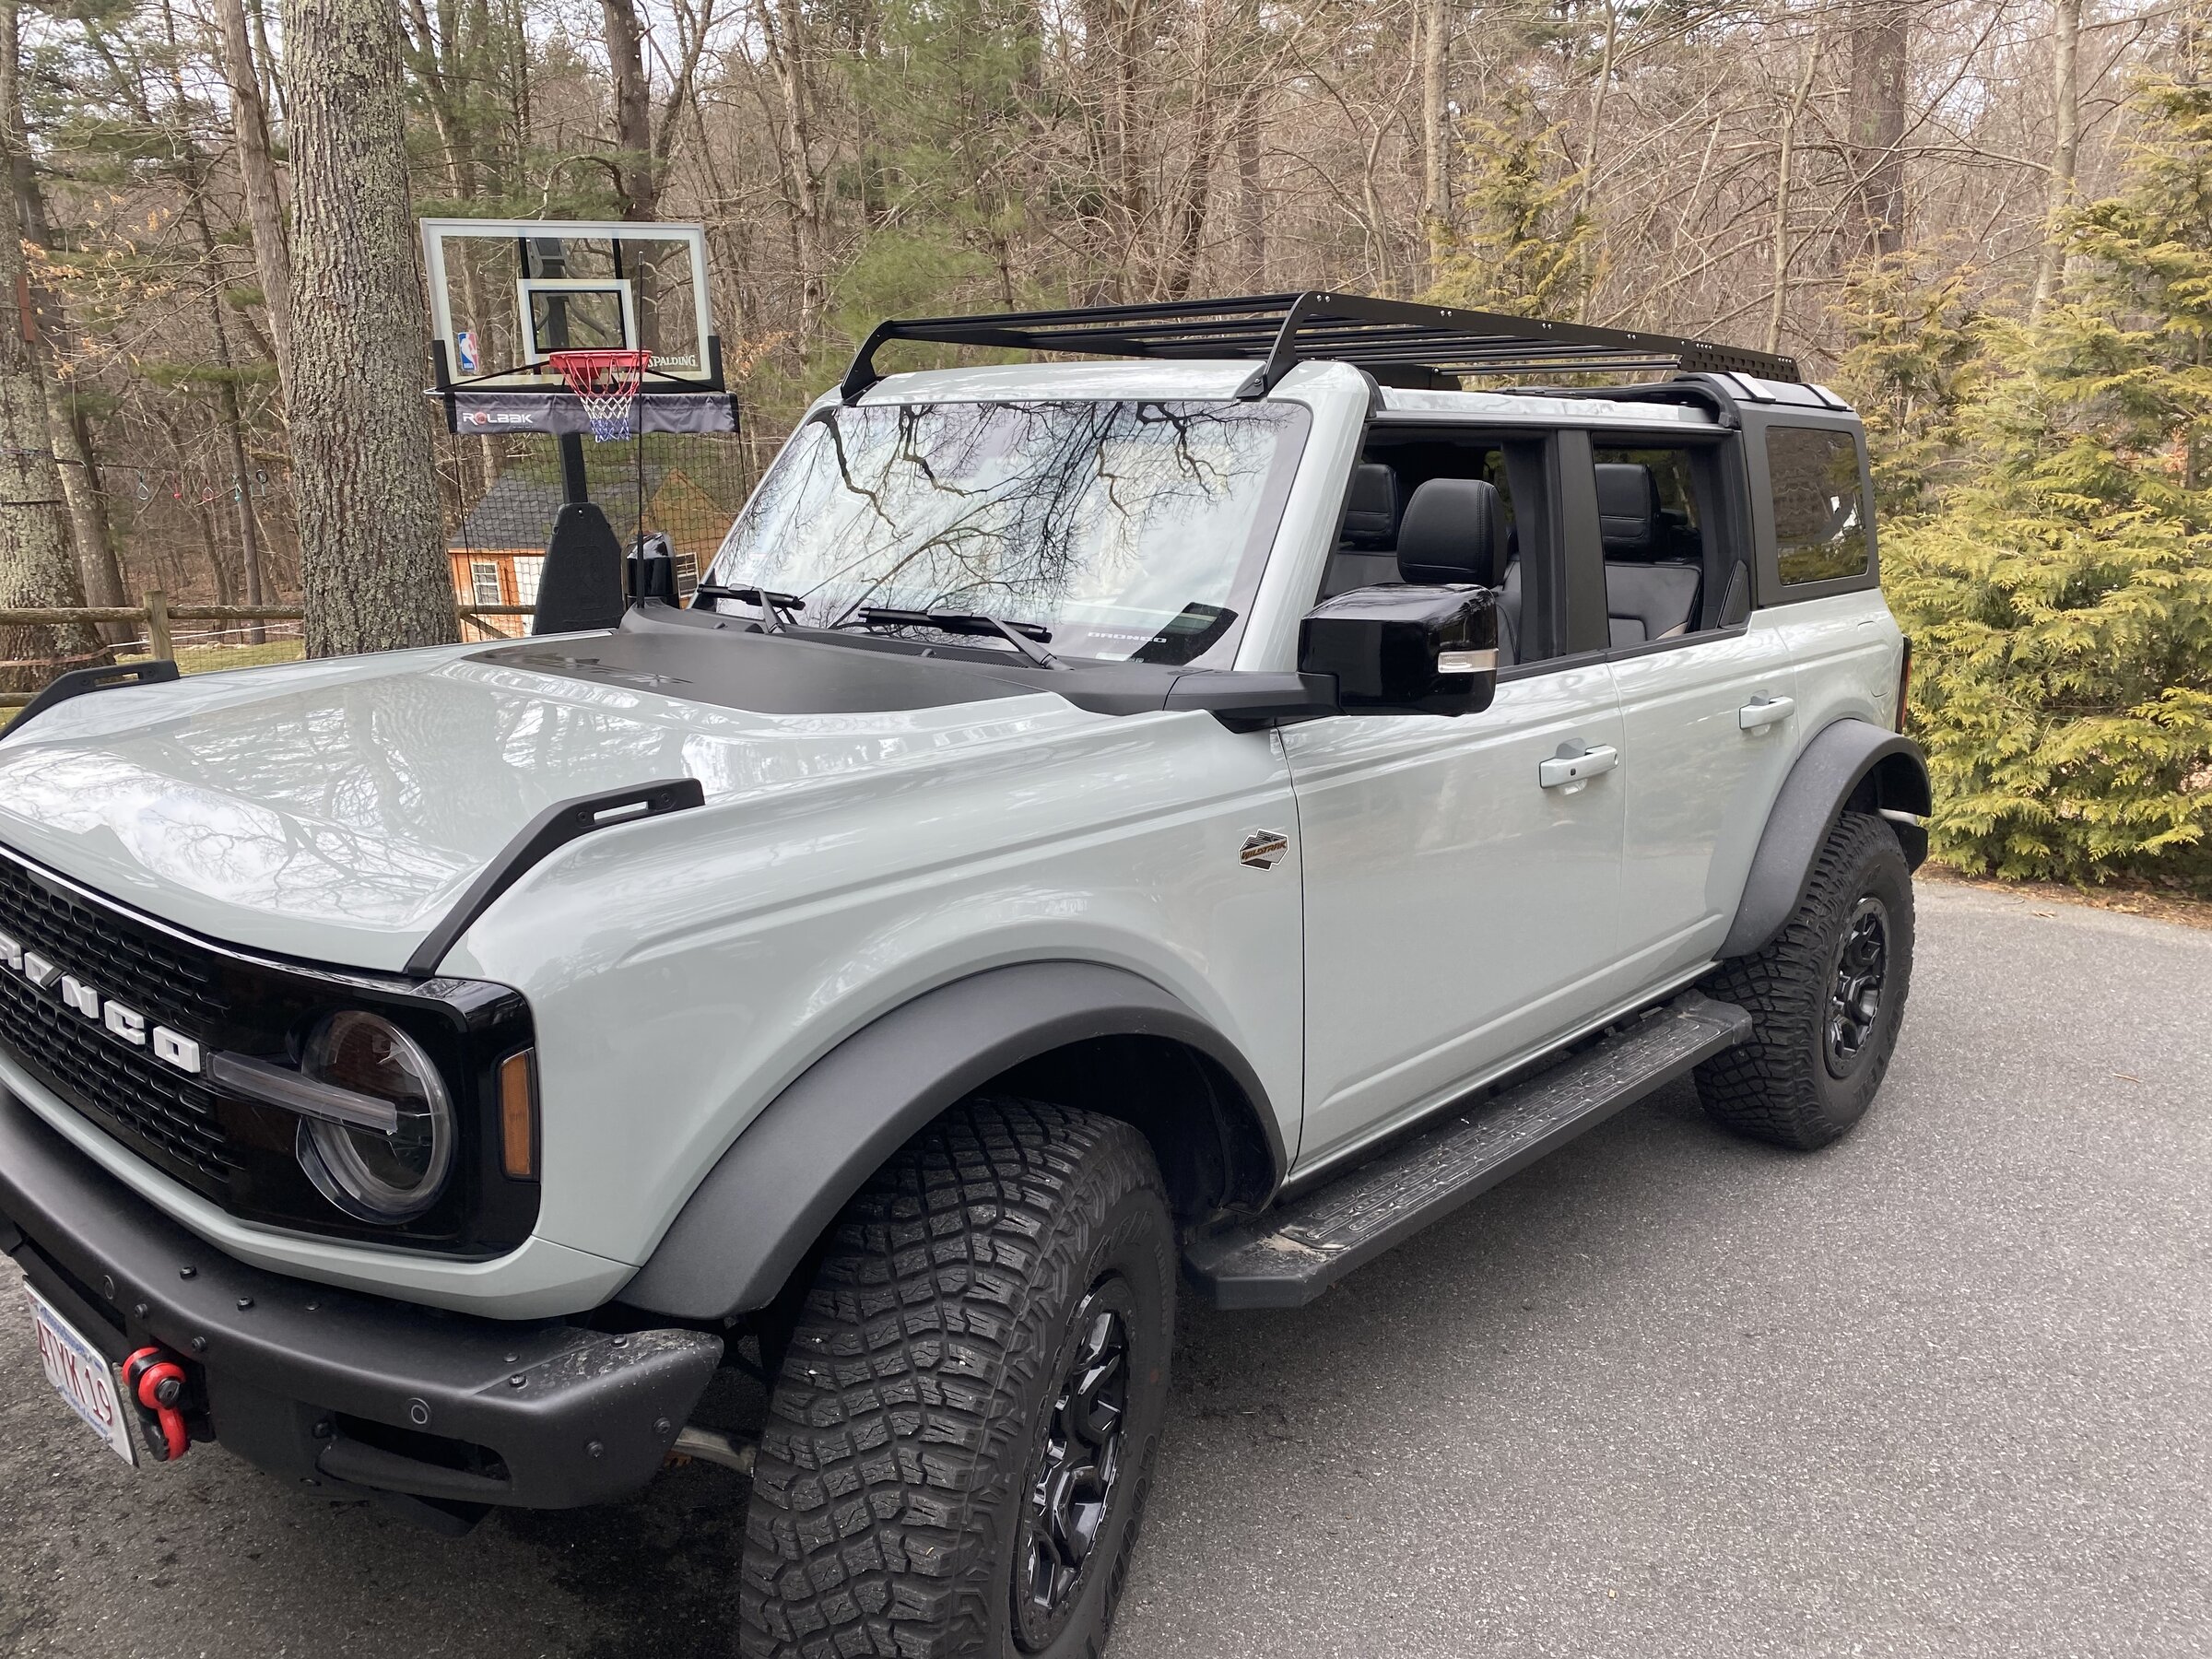 Ford Bronco Full Review w/Pics and Video: Badass Tents Roof Rack IMG_3662